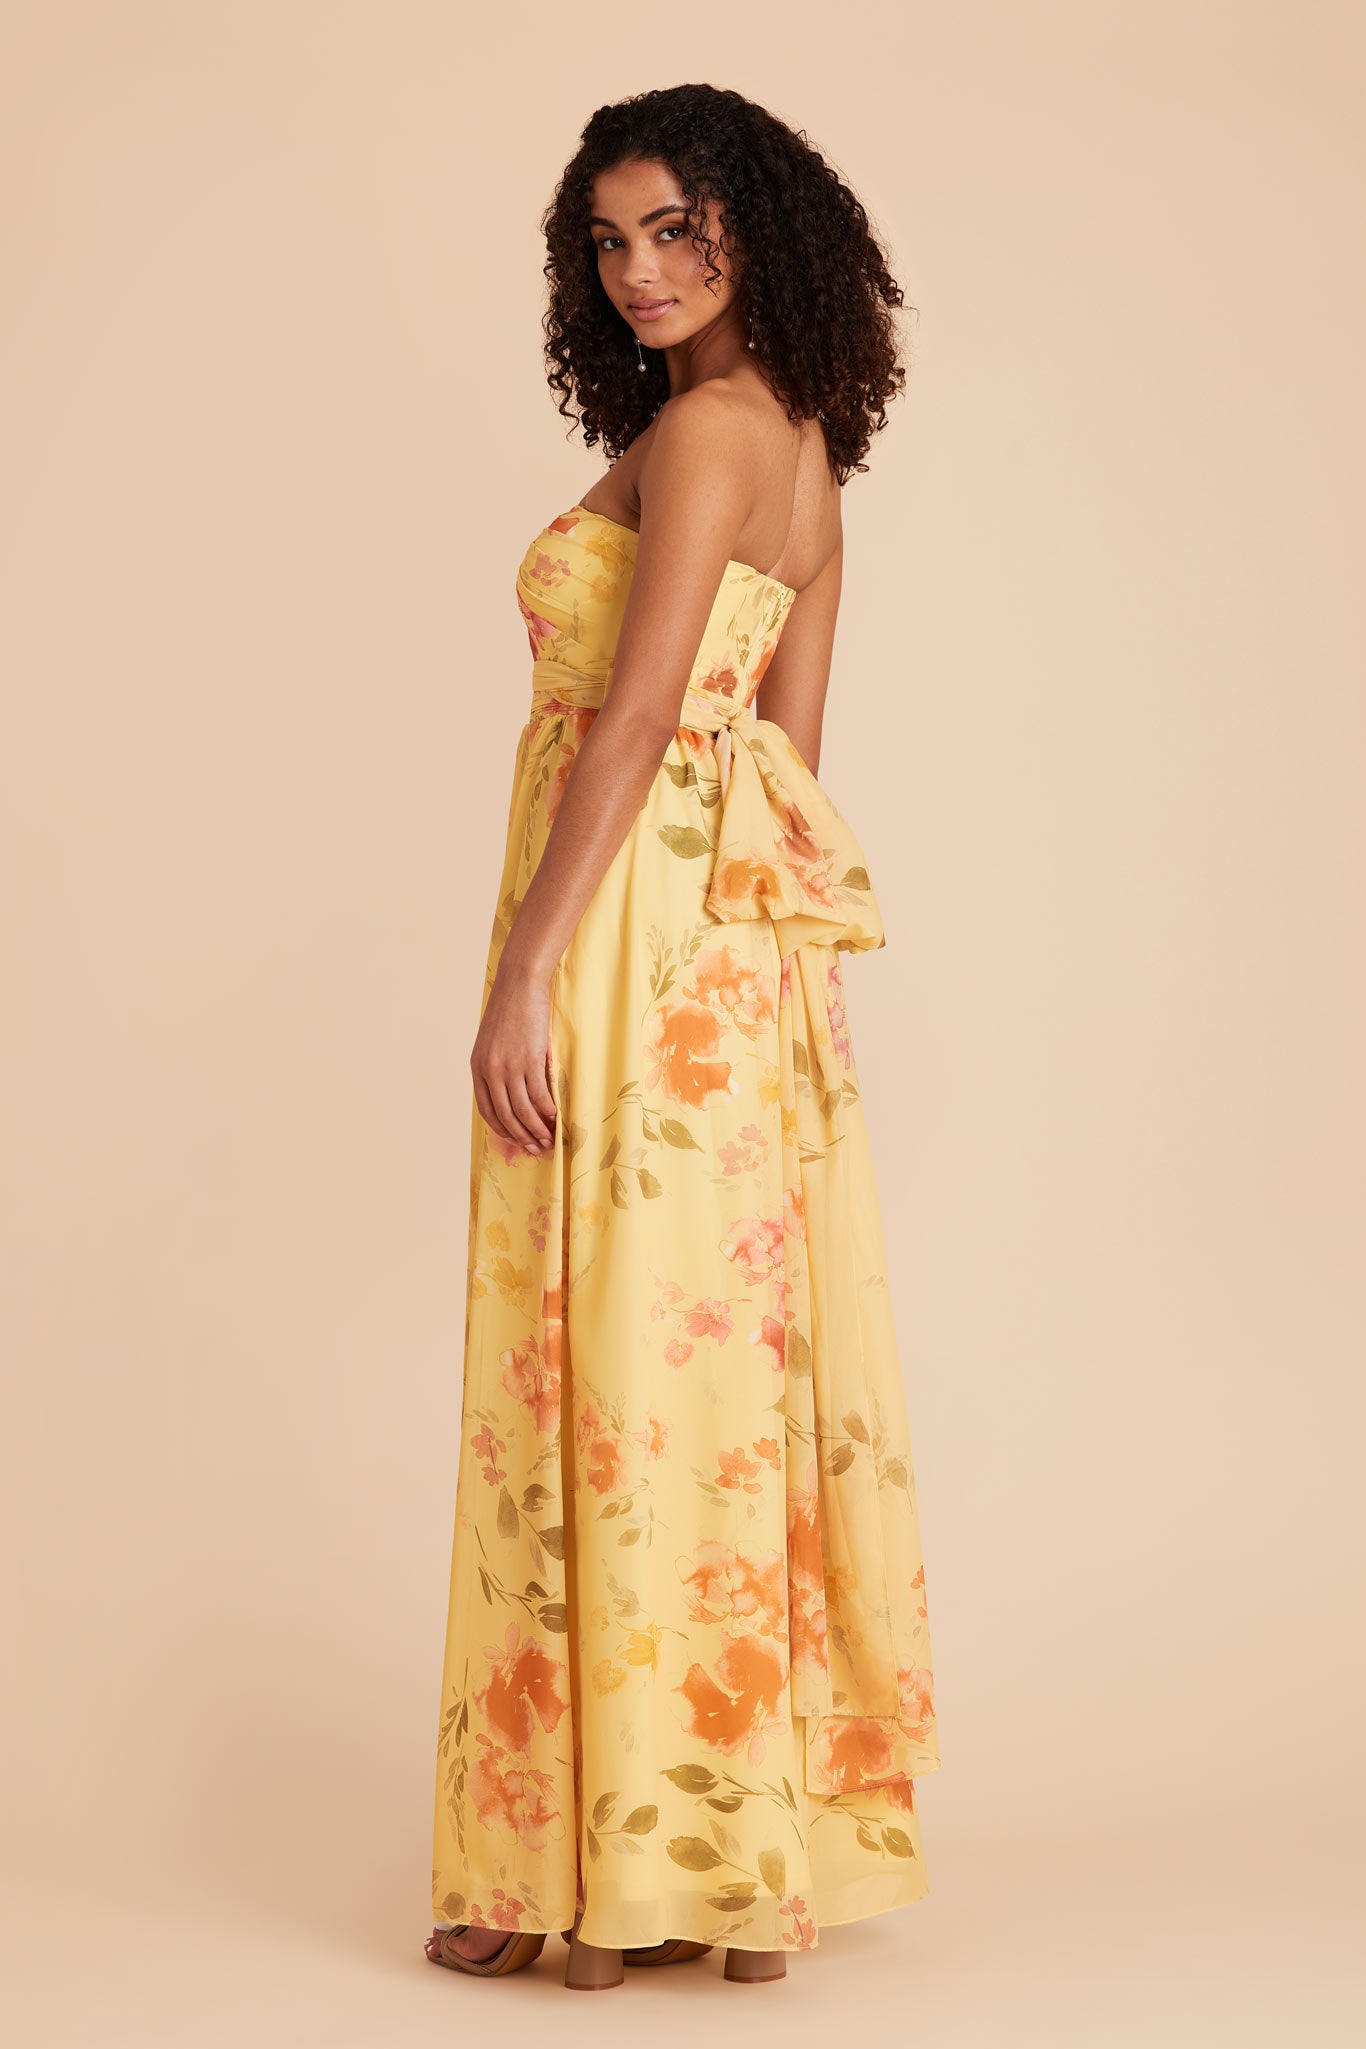 Pale Yellow Rococo Floral Grace Convertible Dress by Birdy Grey